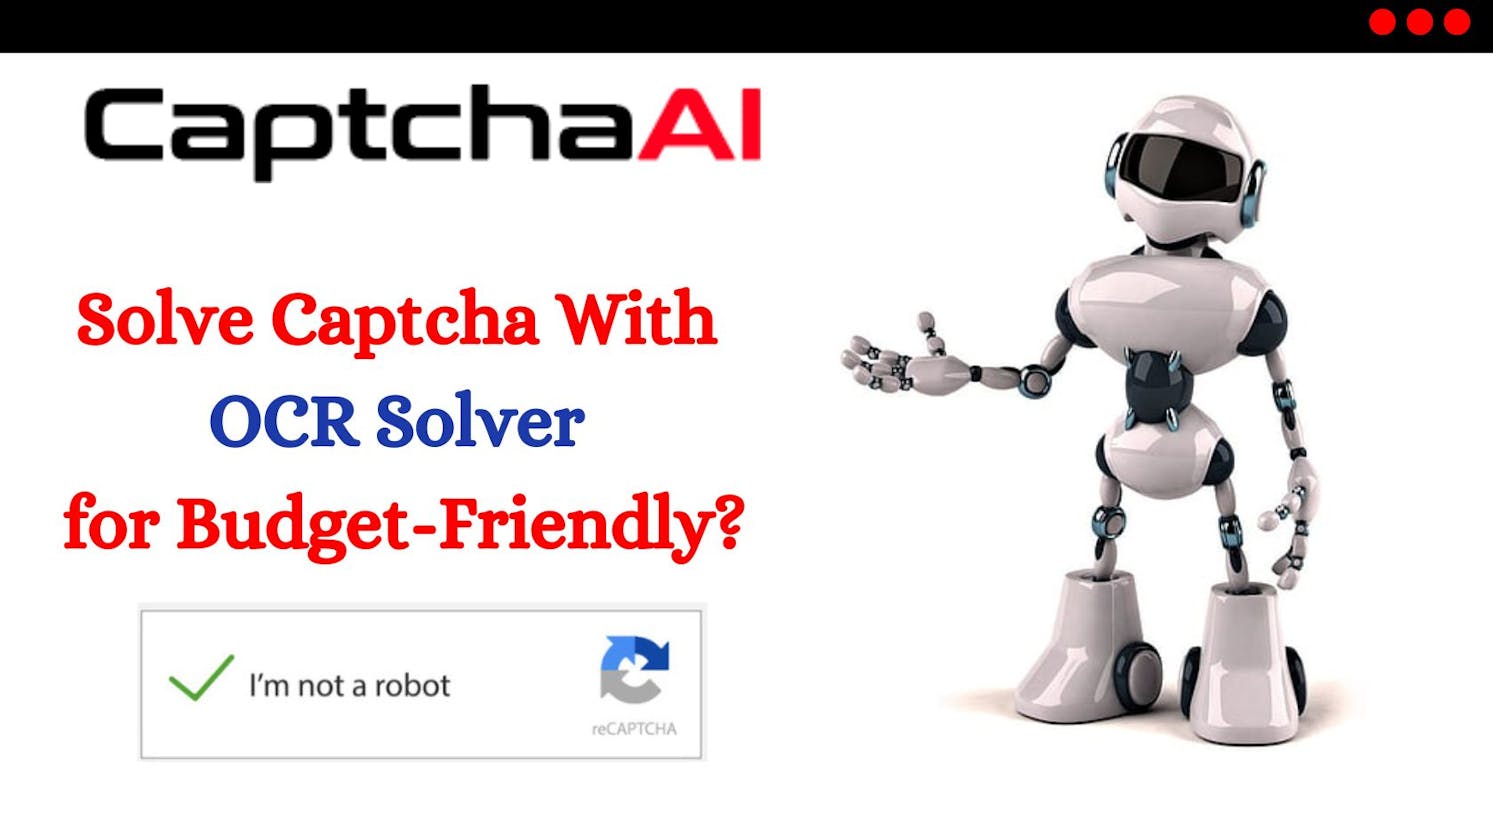 How To Solve Captcha With OCR Solver for Budget-Friendly?